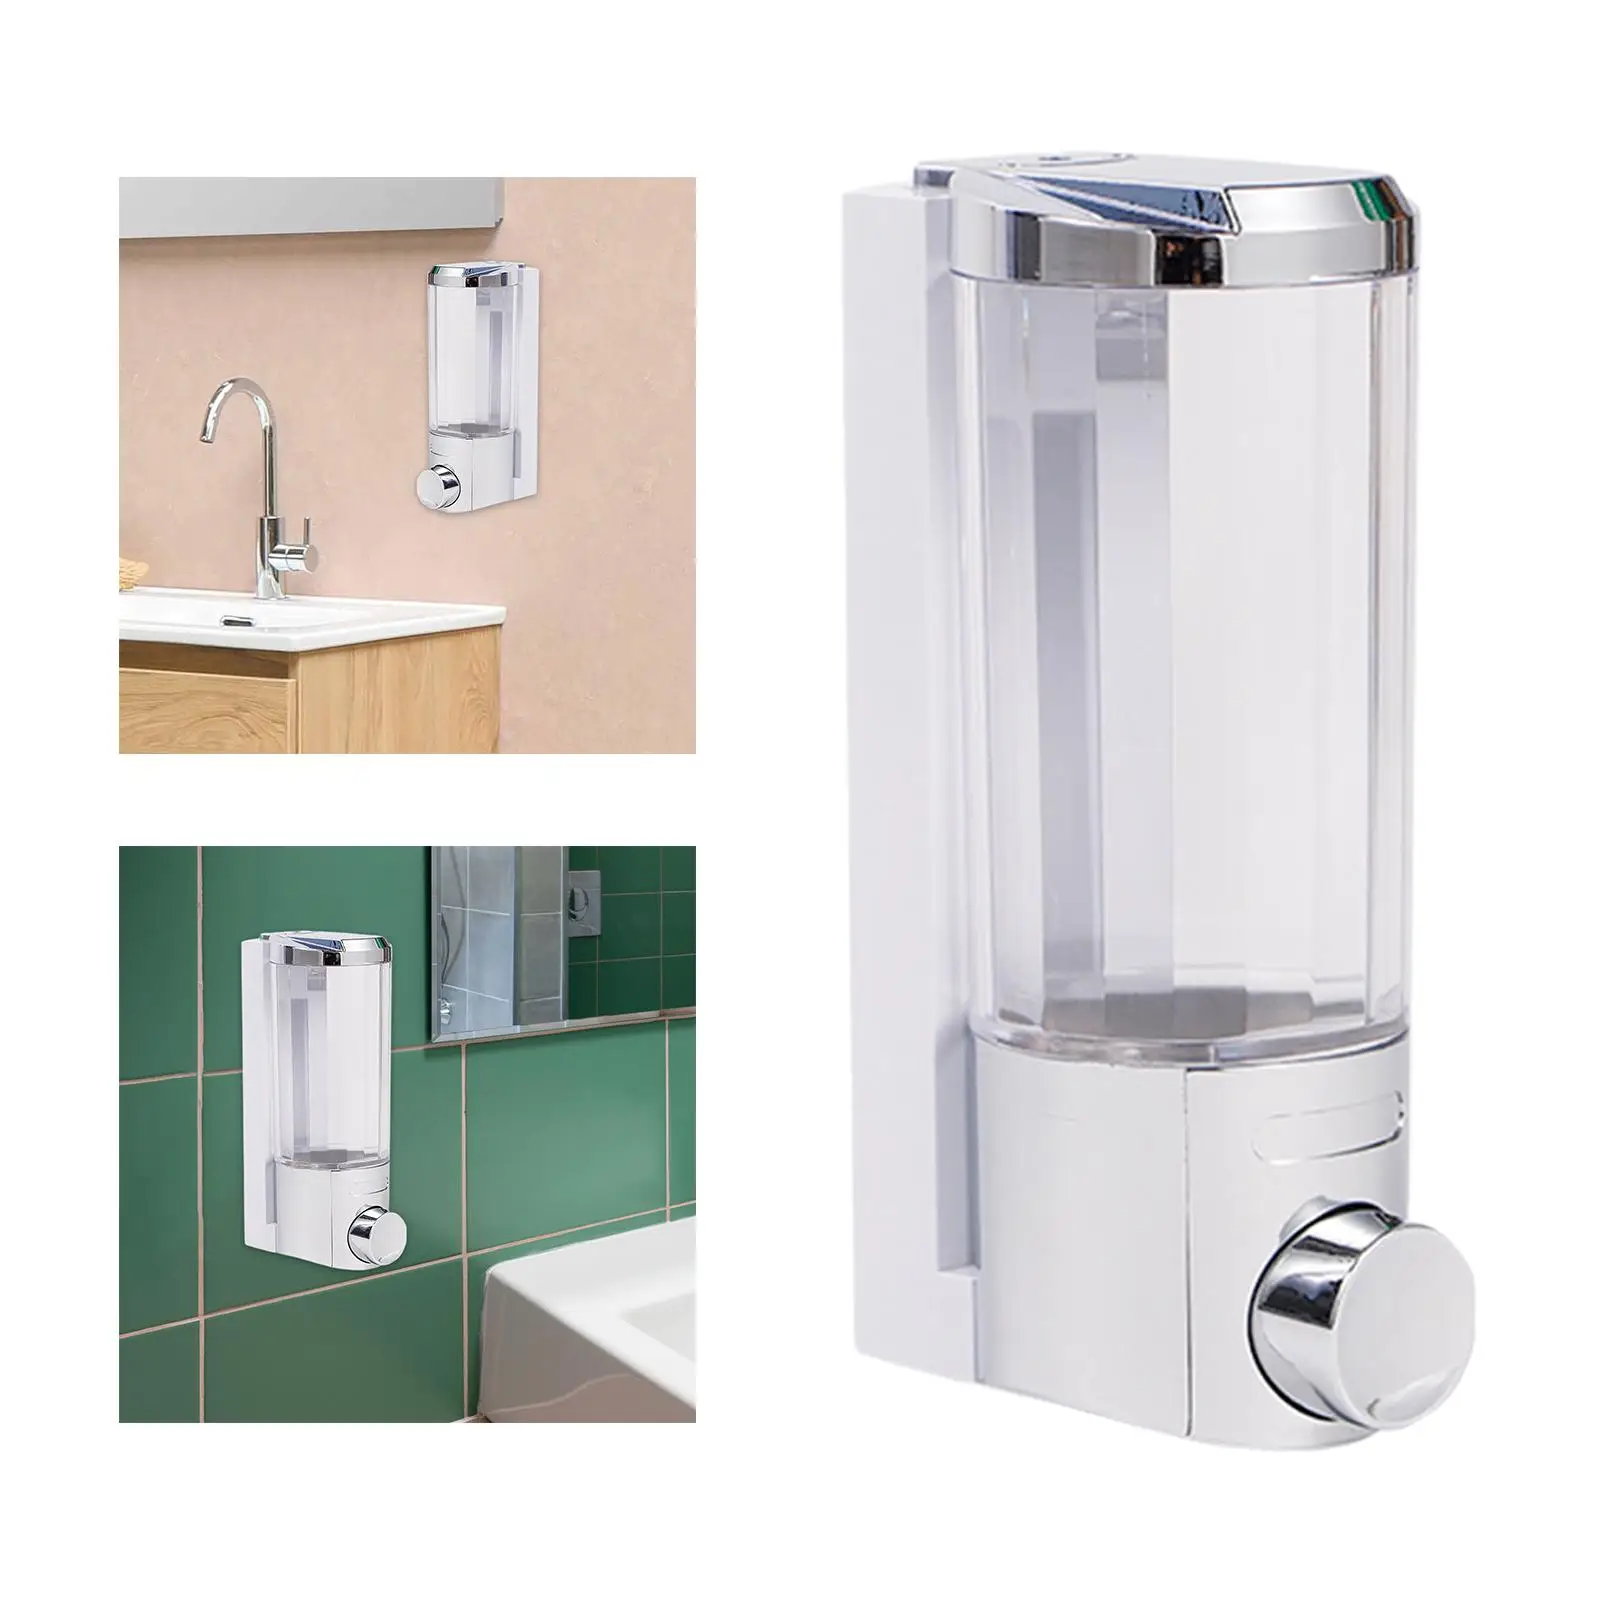 Wall Mounted Manual Soap Dispenser Liquid Containers Shower Hand Soap Dispenser for Bathroom Office Kitchen Shampoo Gel Home